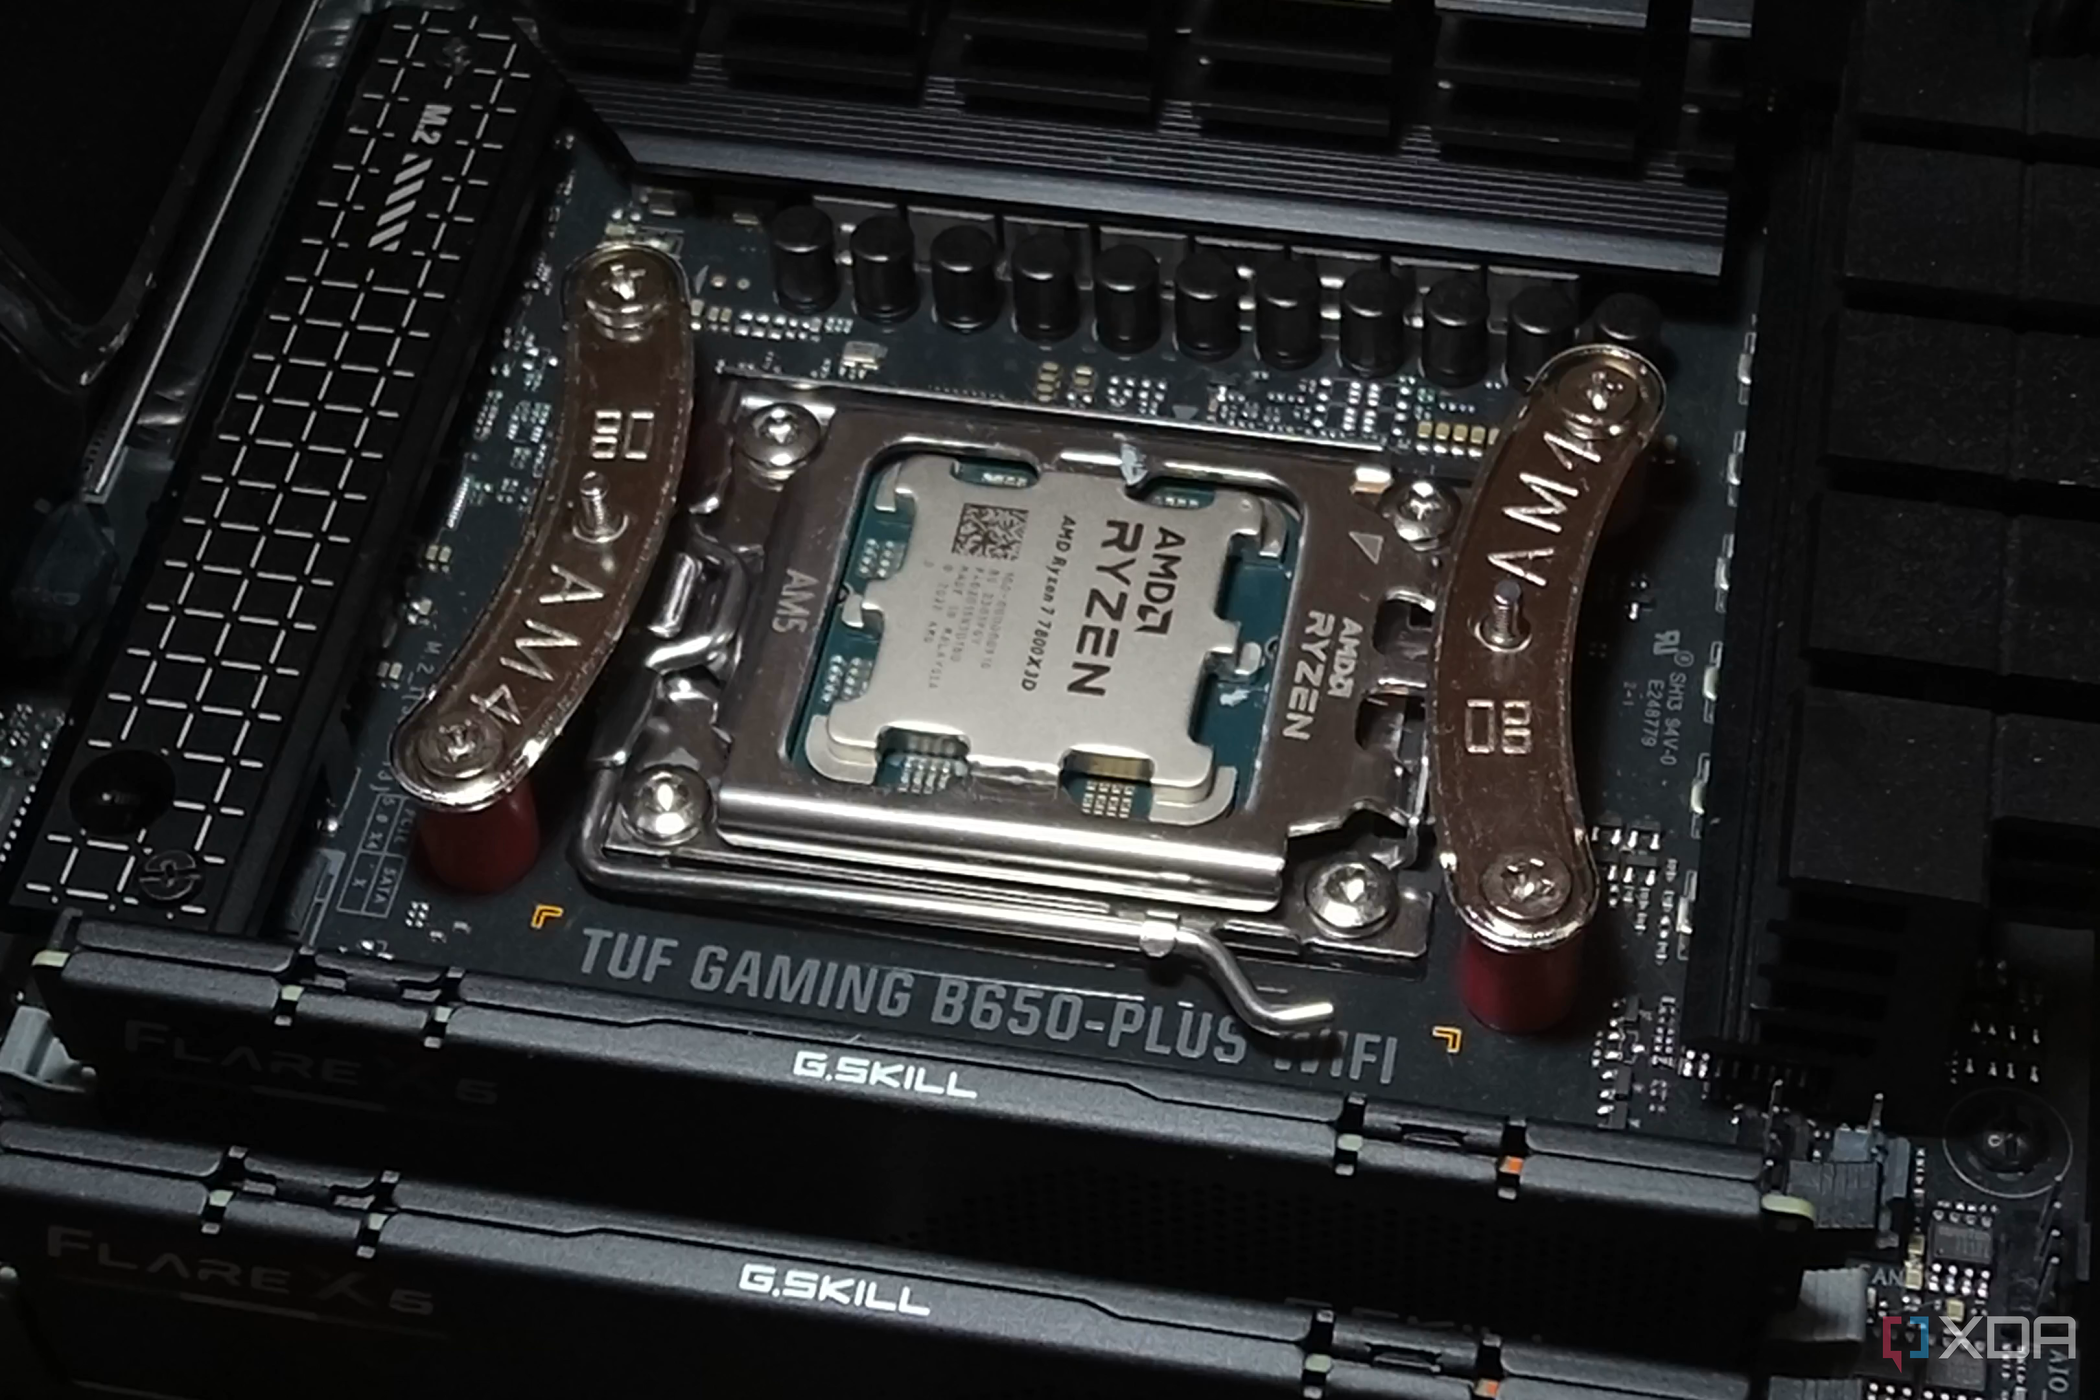 Thermal paste vs liquid metal for your CPU: Which is better?